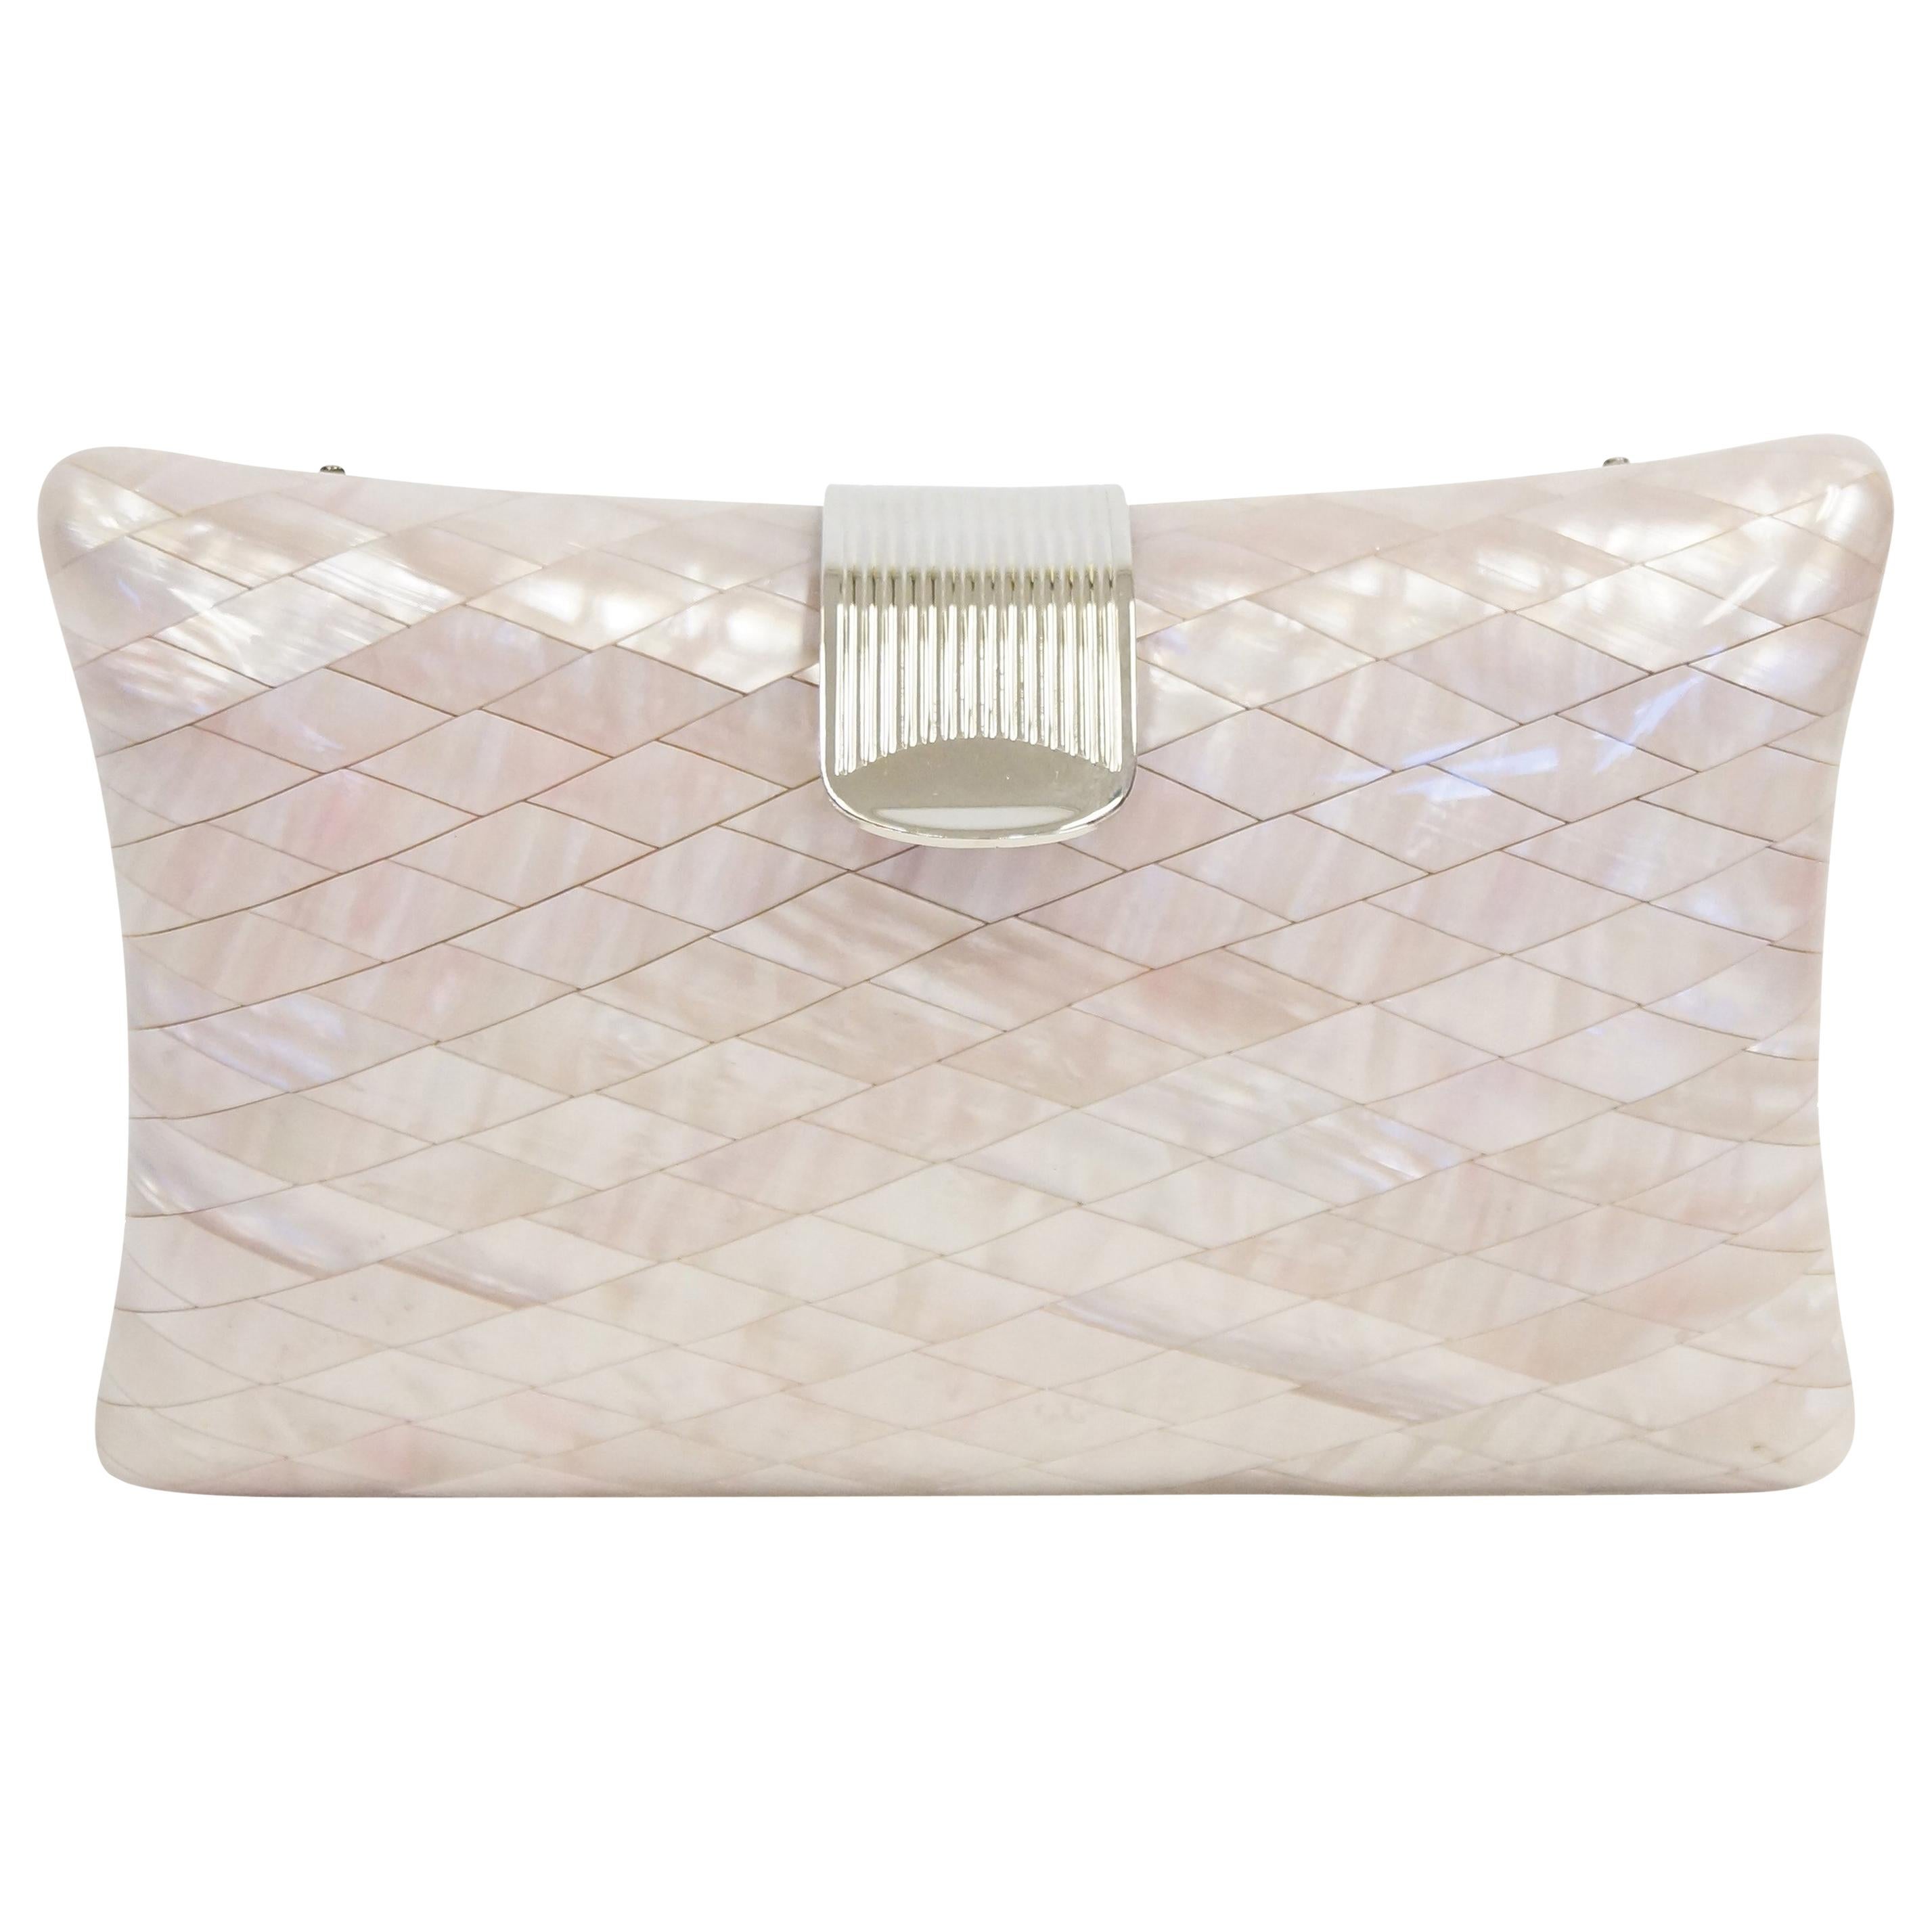 1950s Lisette Mother of Pearl and Lucite Clutch Made in Italy 